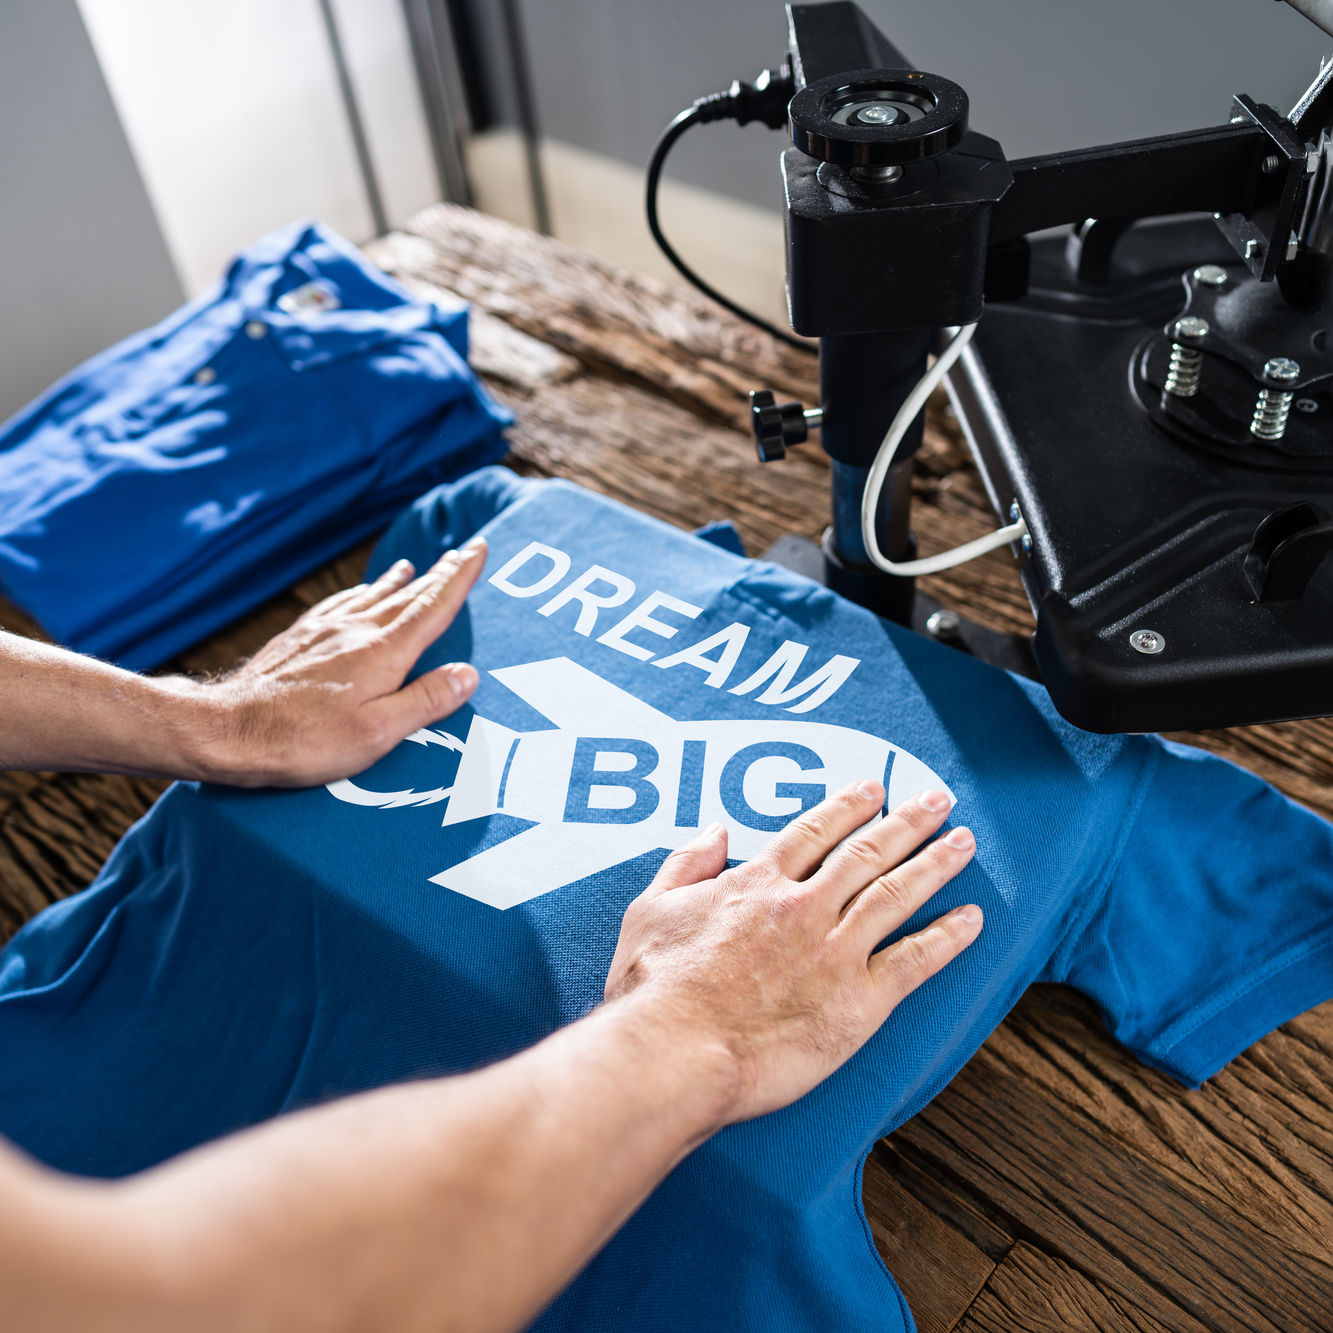 From Screen Print to Sublimation, What T-Shirt Printing Method is Best For You?